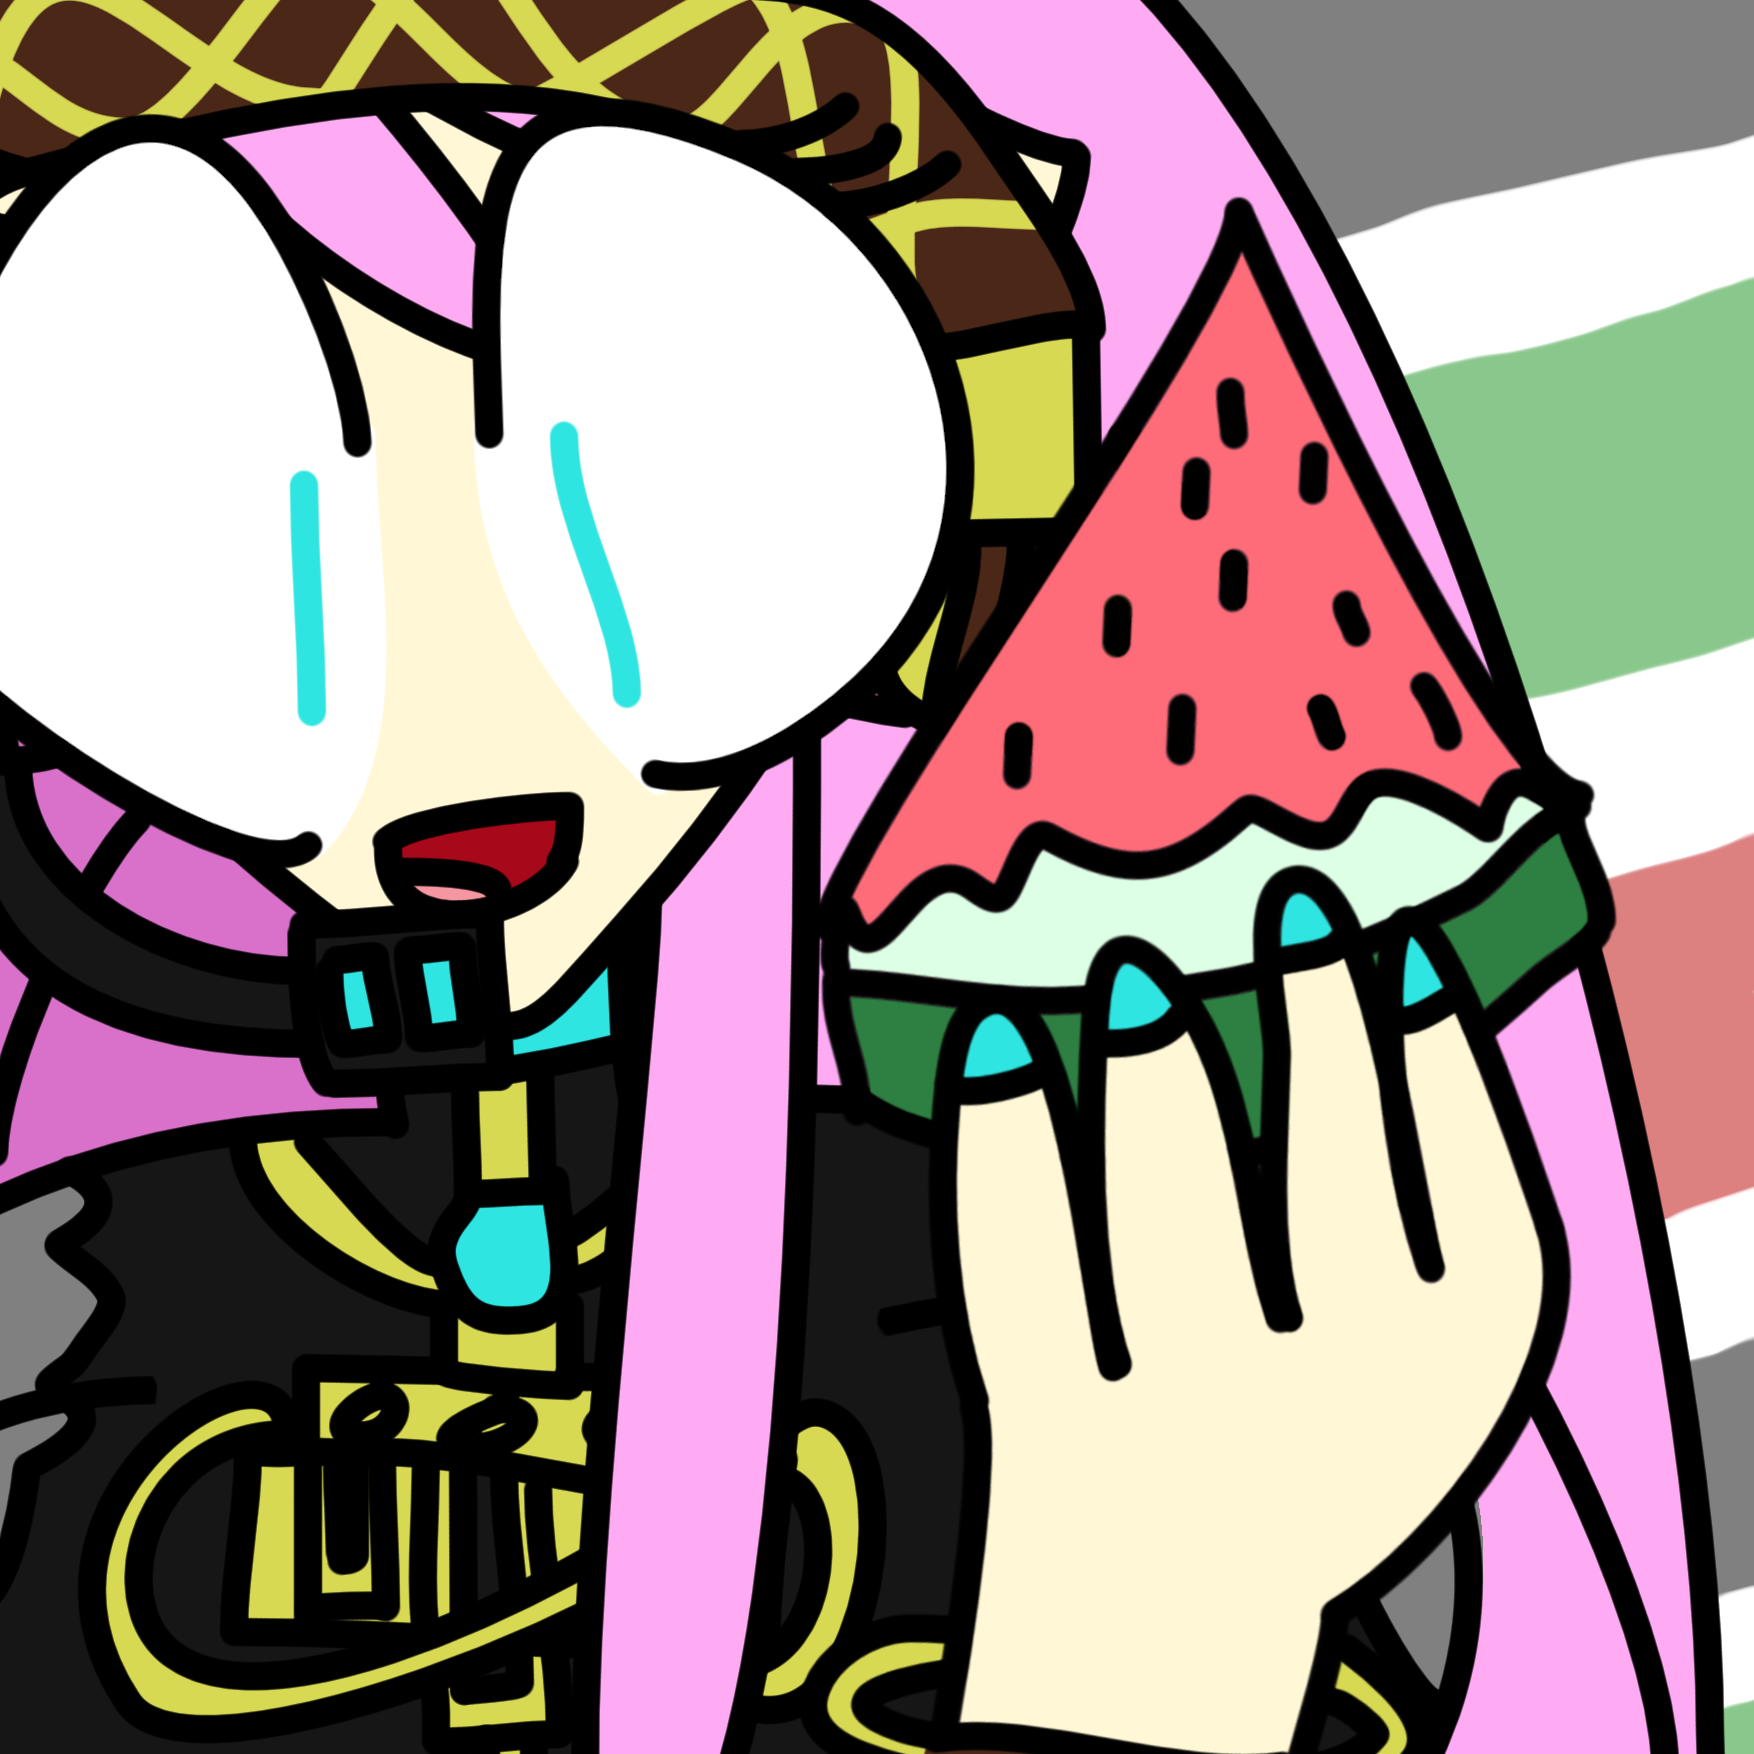 A digital drawing of Luka Megurine with a happy expression, holding a watermelon. The background is shown as striped lines, representing the Palestine flag.